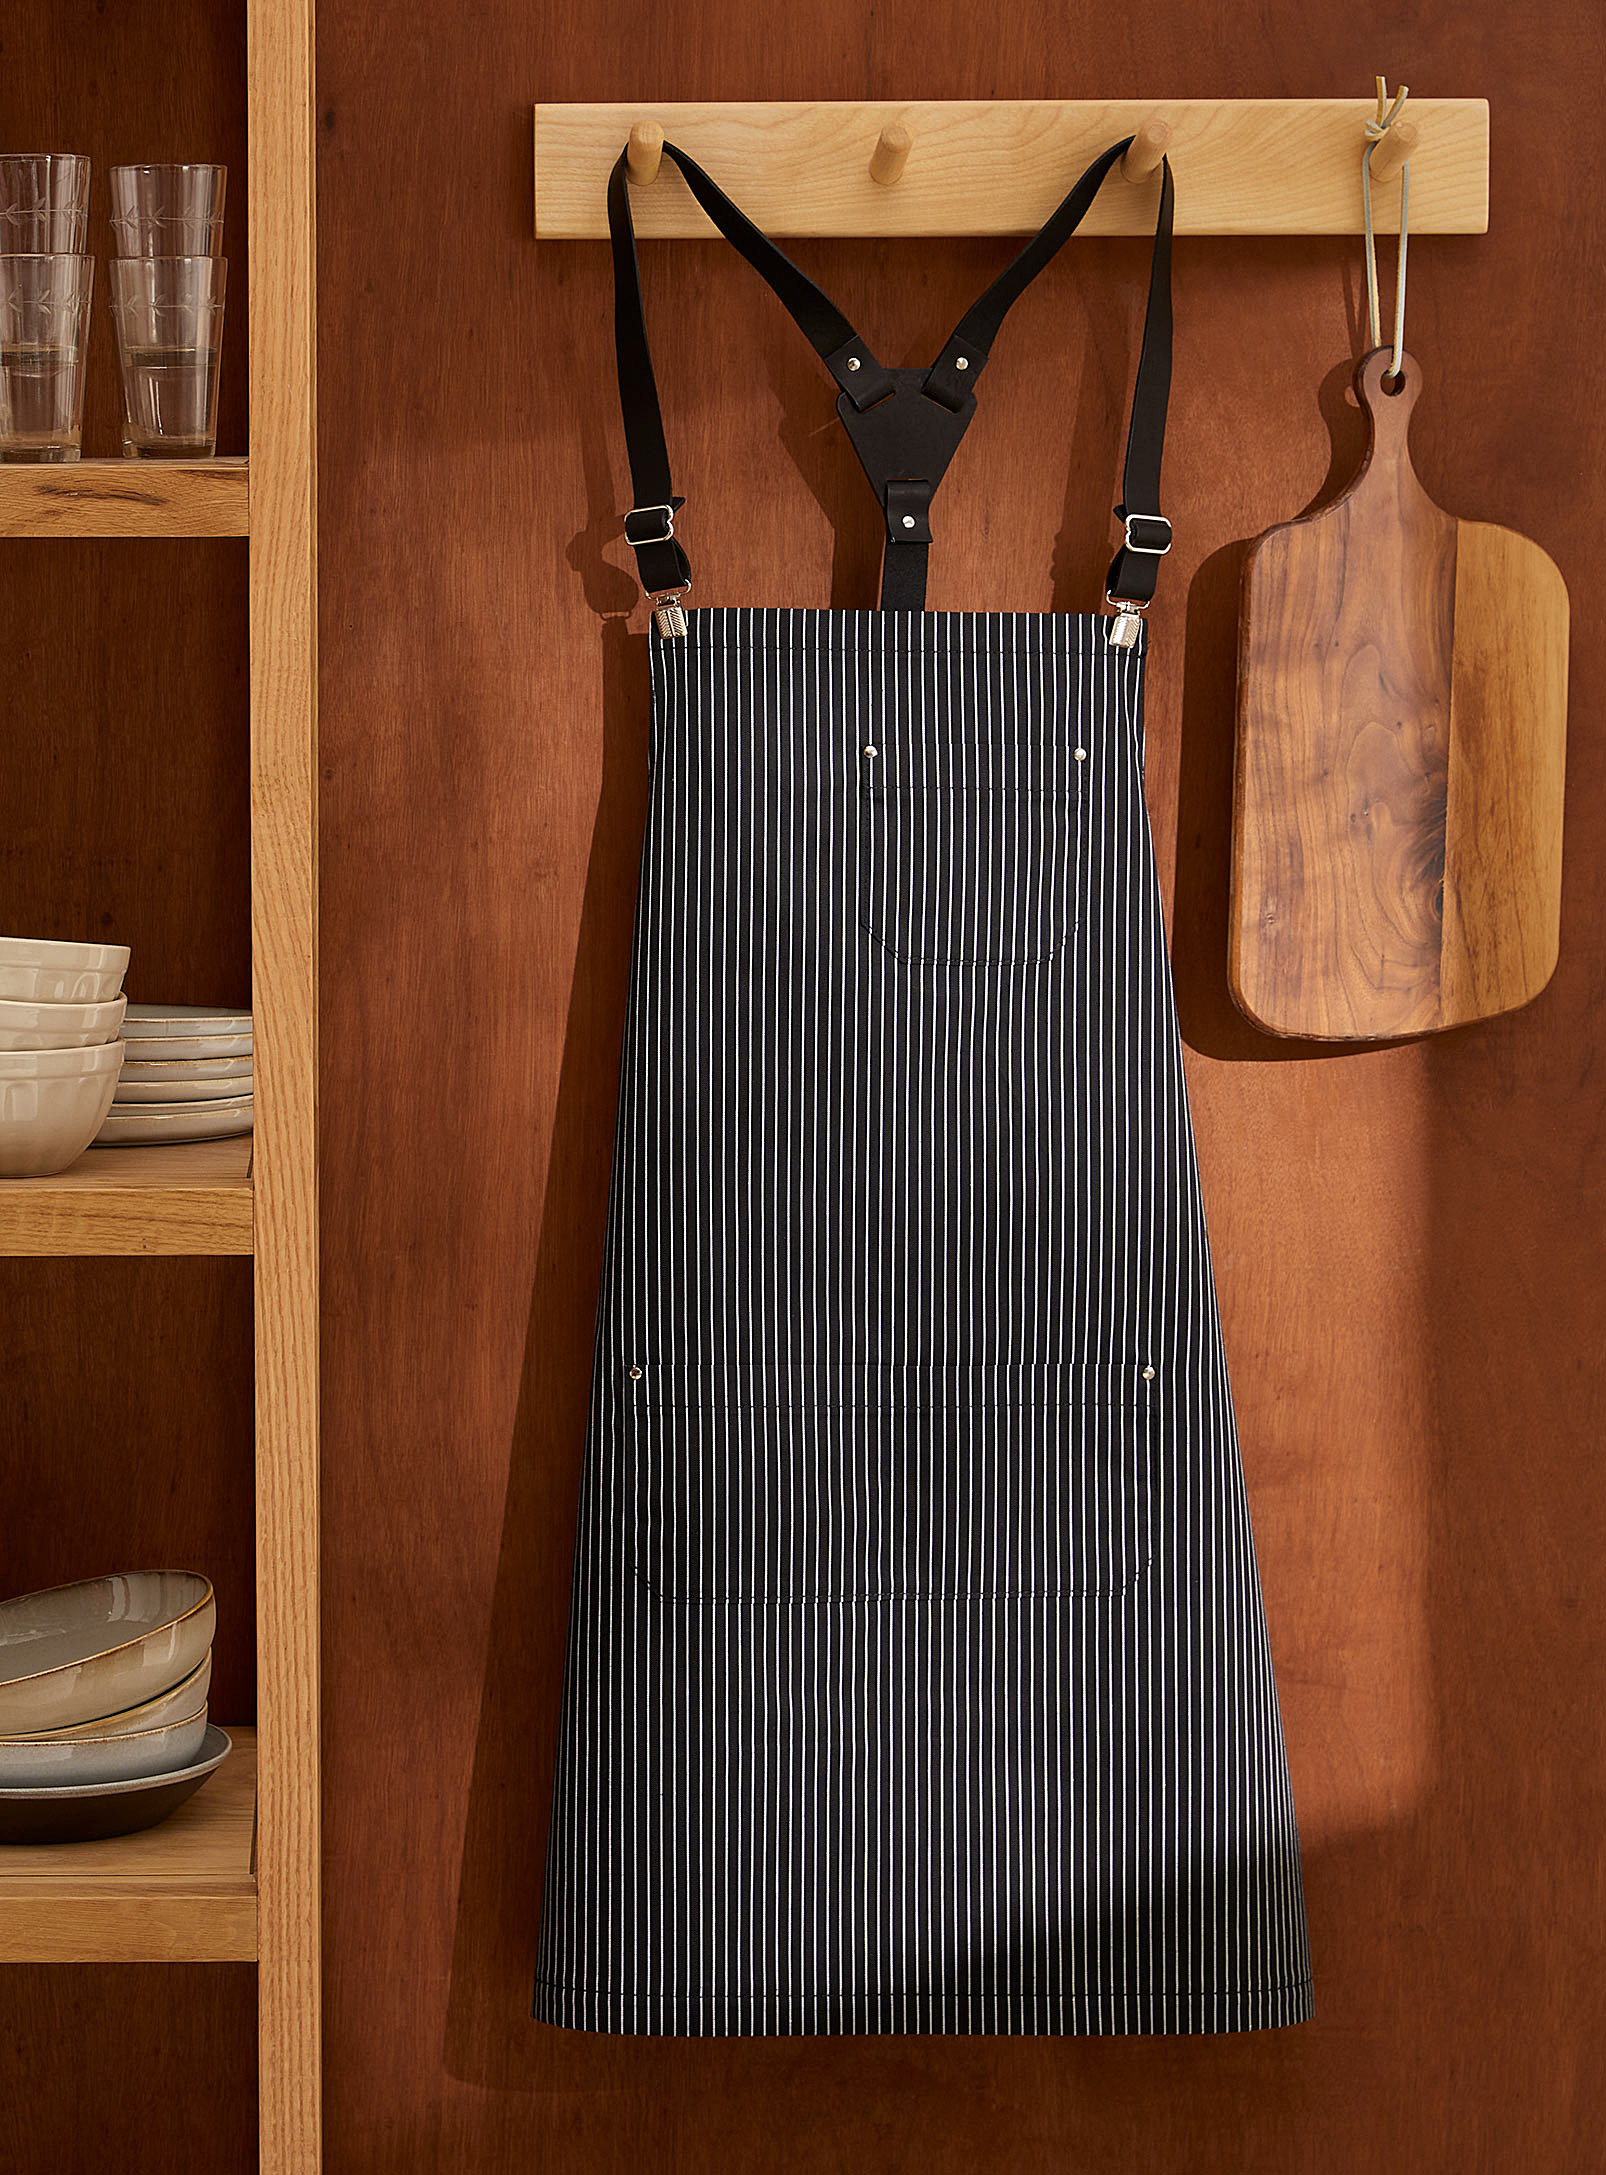 Atelier Chalet - Pinstripe leather and cotton apron